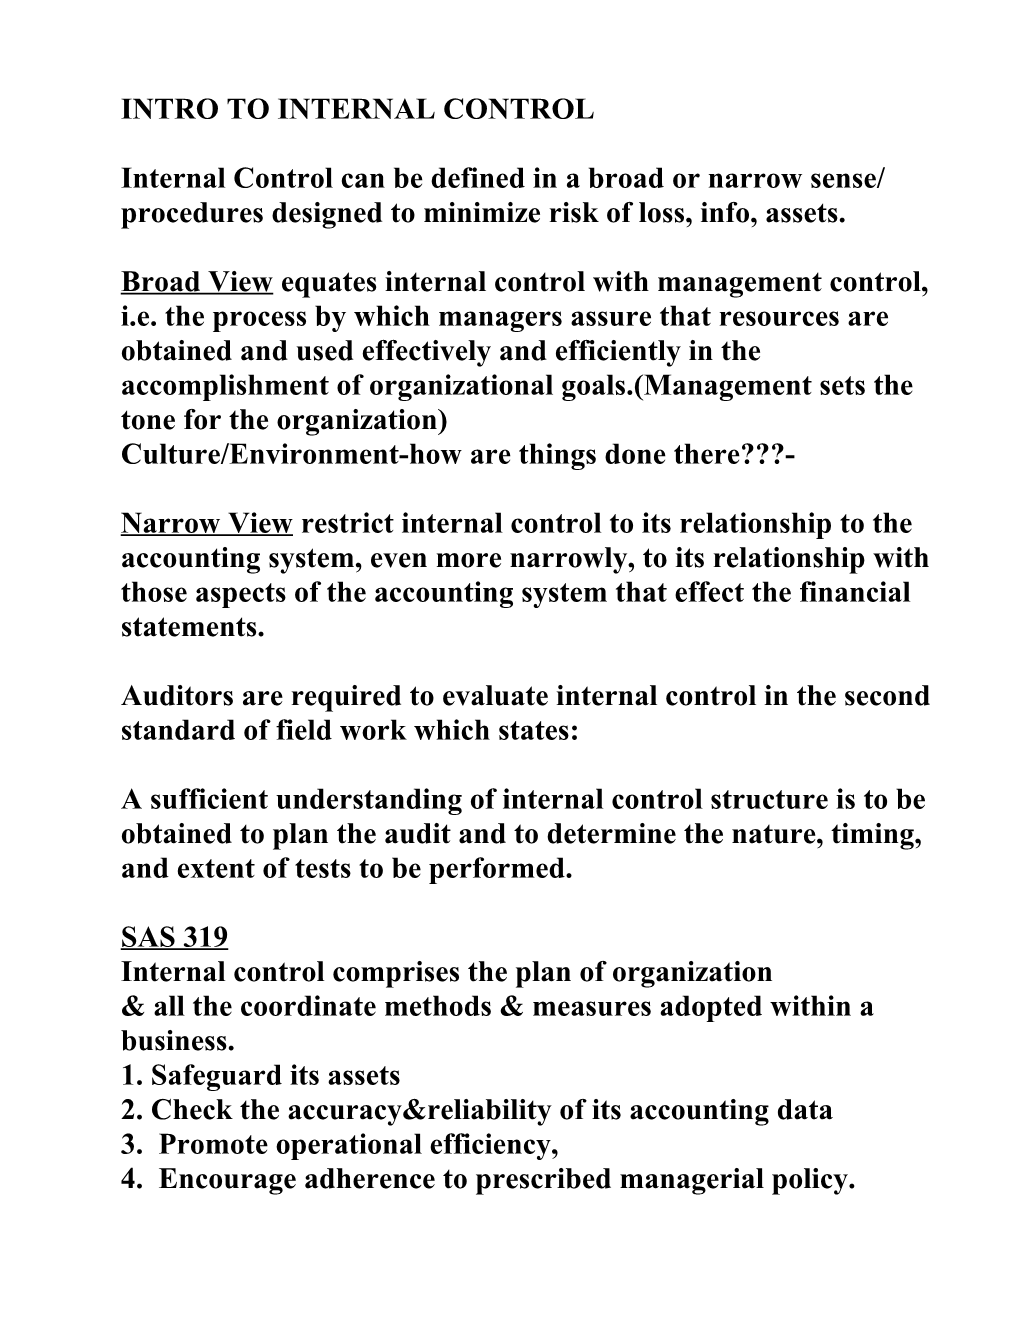 Chapter 5 - Intro to Internal Control